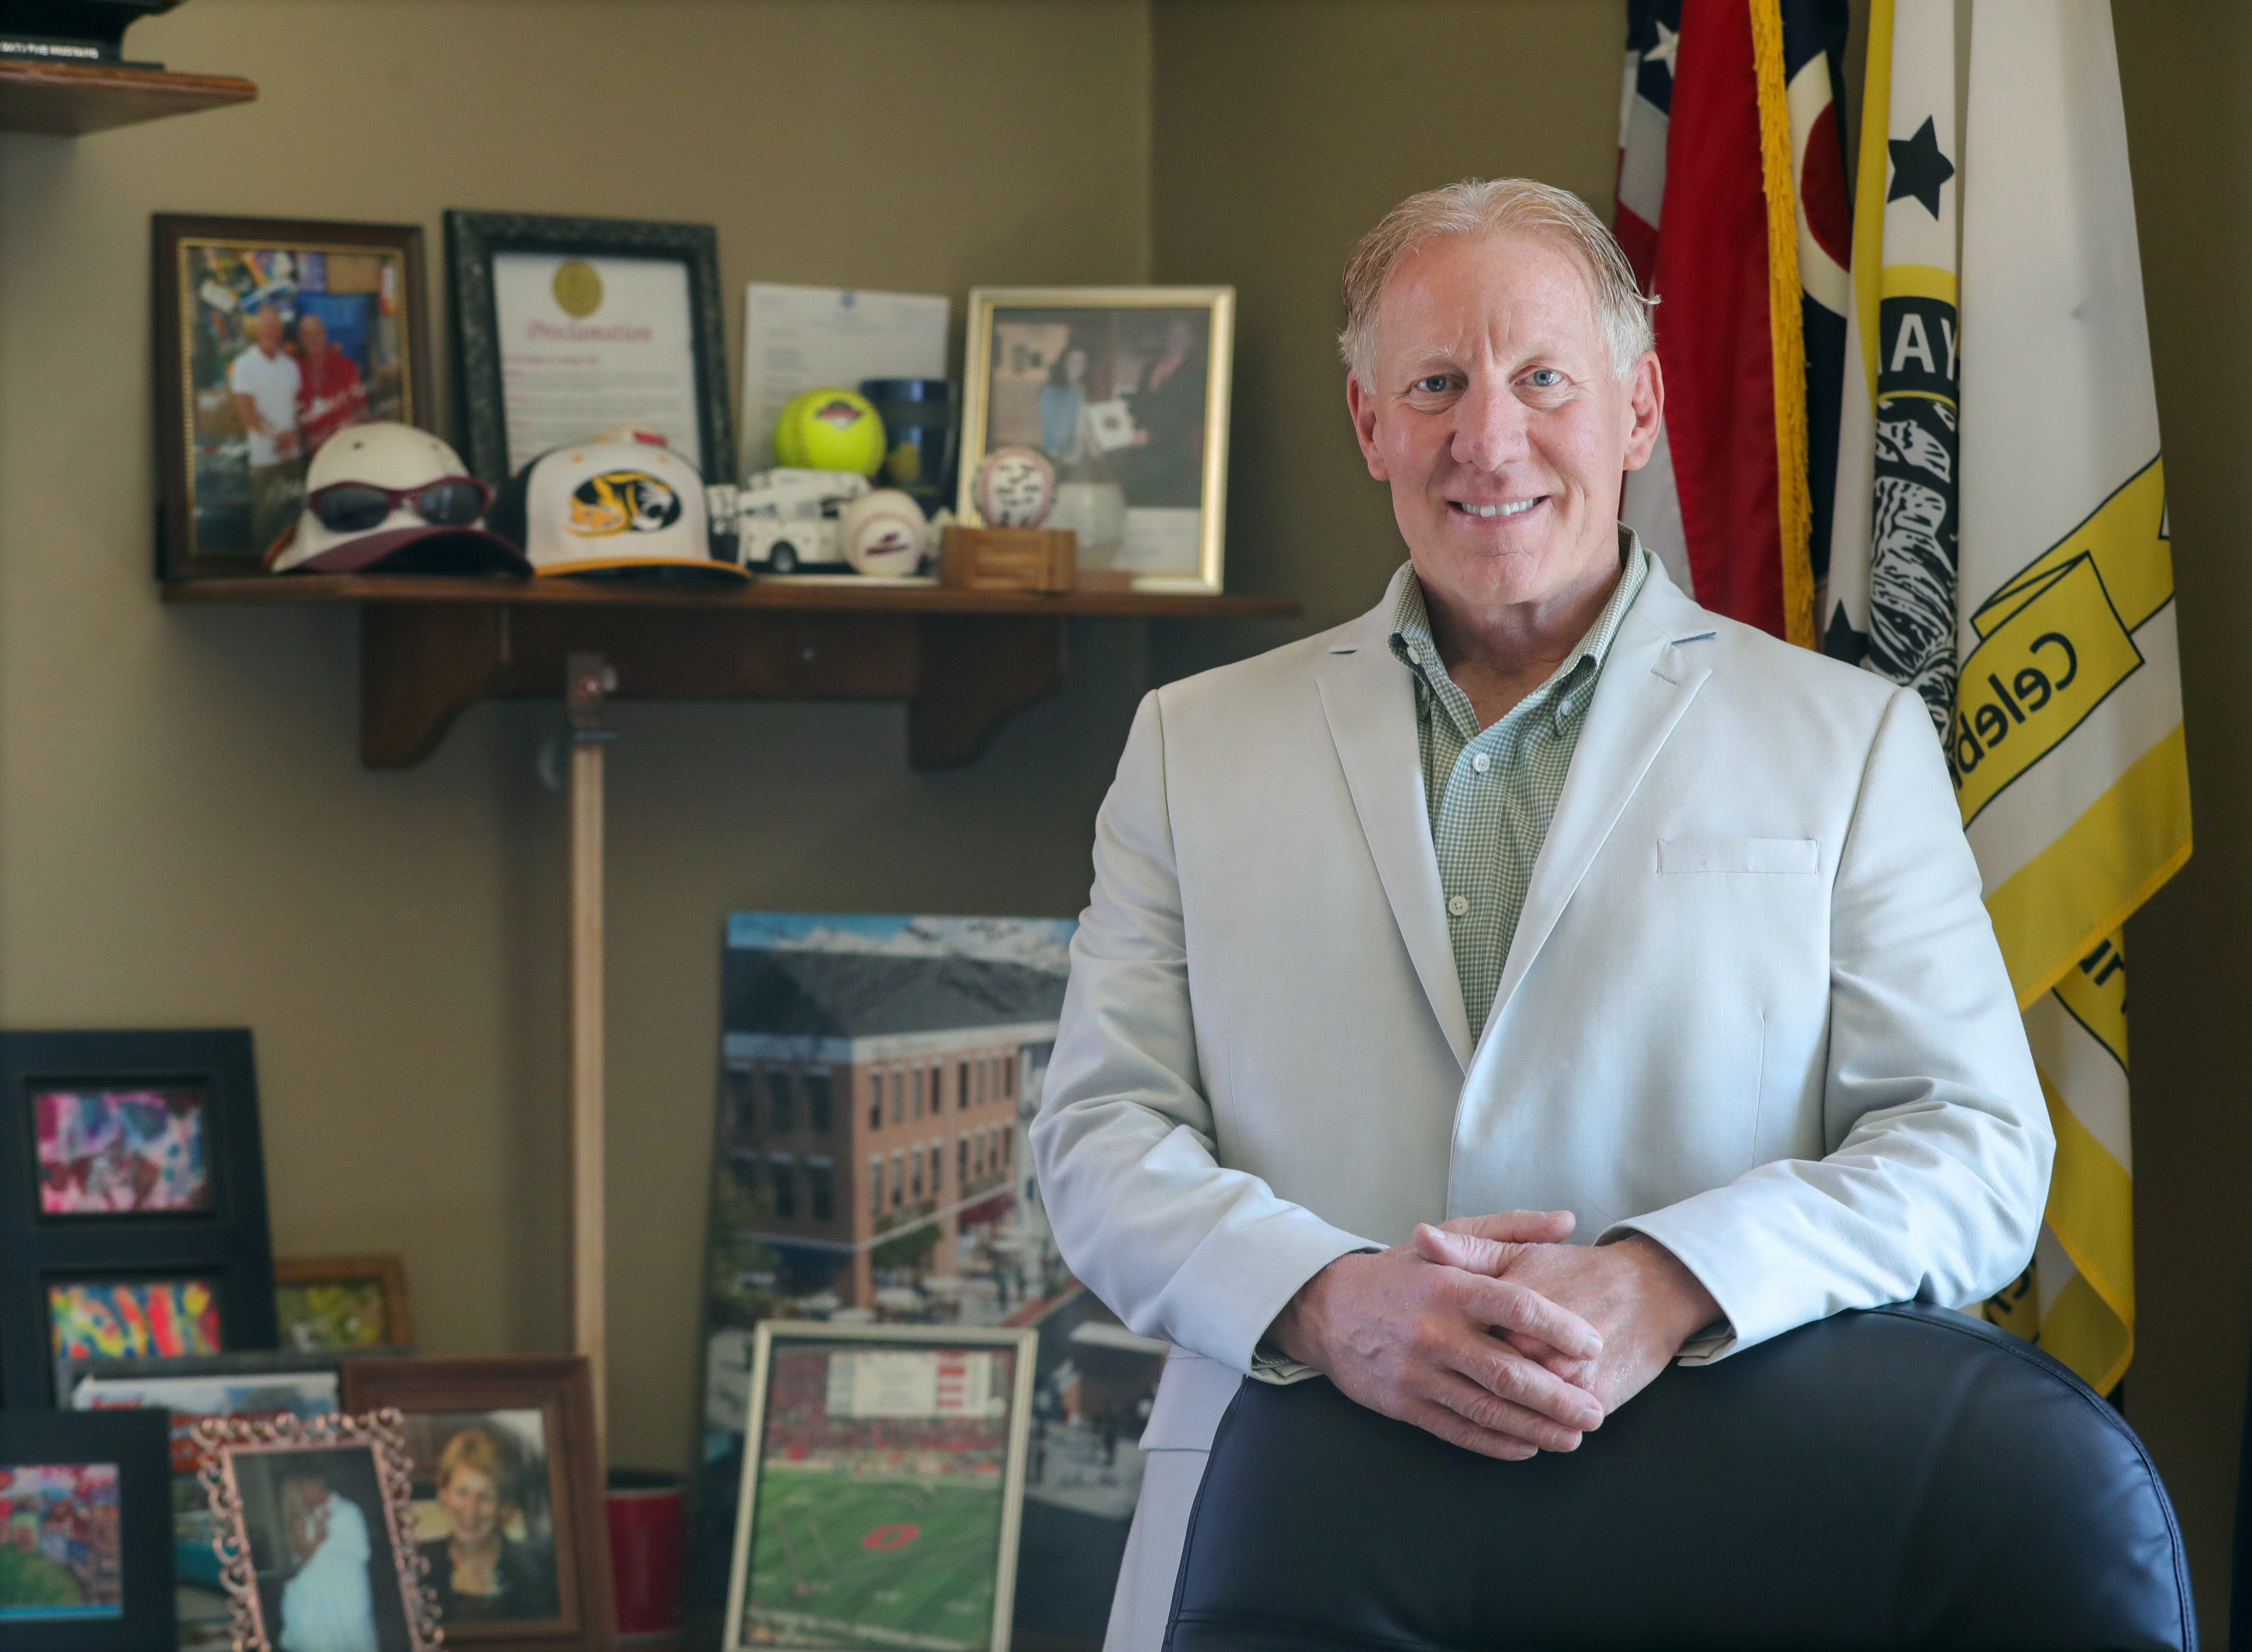 'Riding a high': Cuyahoga Falls mayor talks about city's prospects, growth